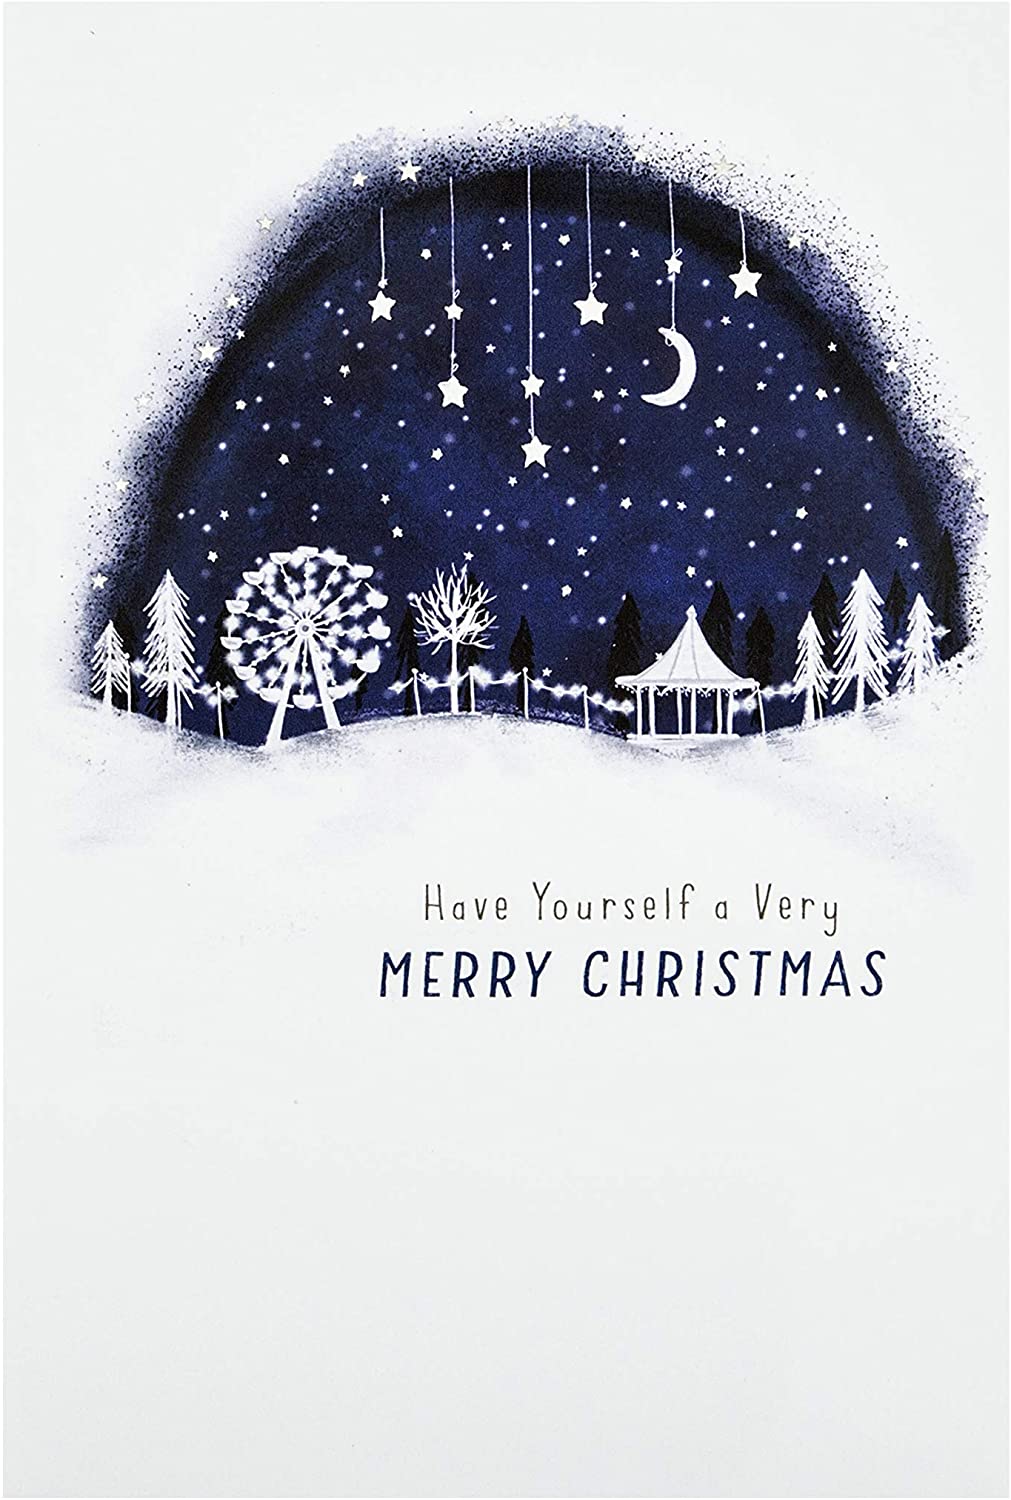 Starry Skies Boxed Charity Christmas Cards 12 Cards in 2 Contemporary Designs 